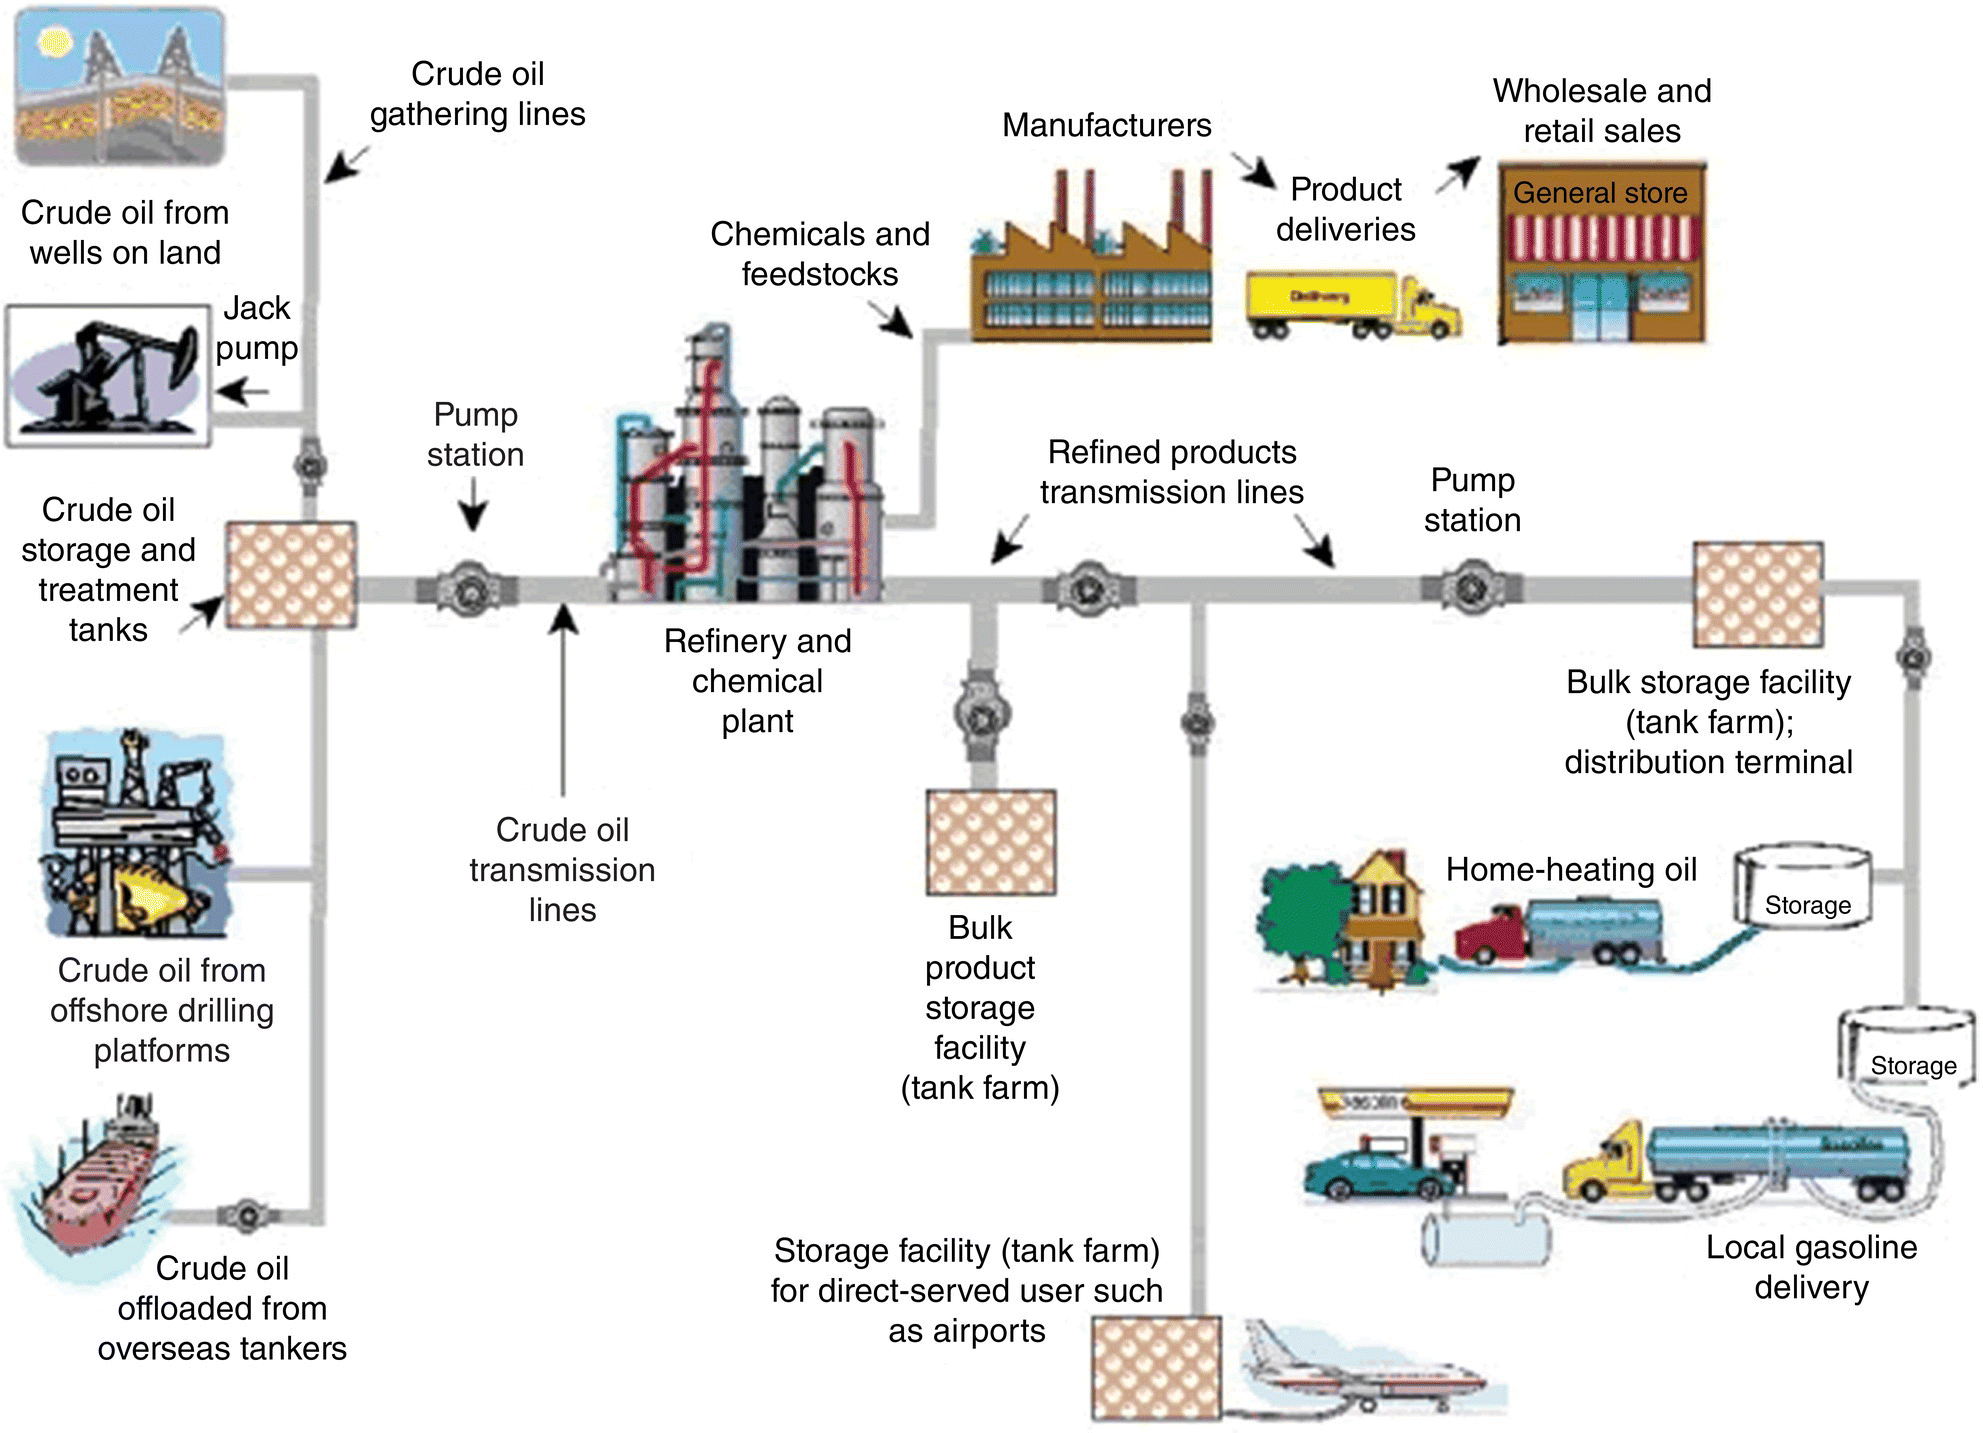 Schematic illustrating natural gas pipeline system from the well head to the customer, with arrows indicating crude oil gathering lines, pump station, crude oil transmission lines, manufacturers, etc.